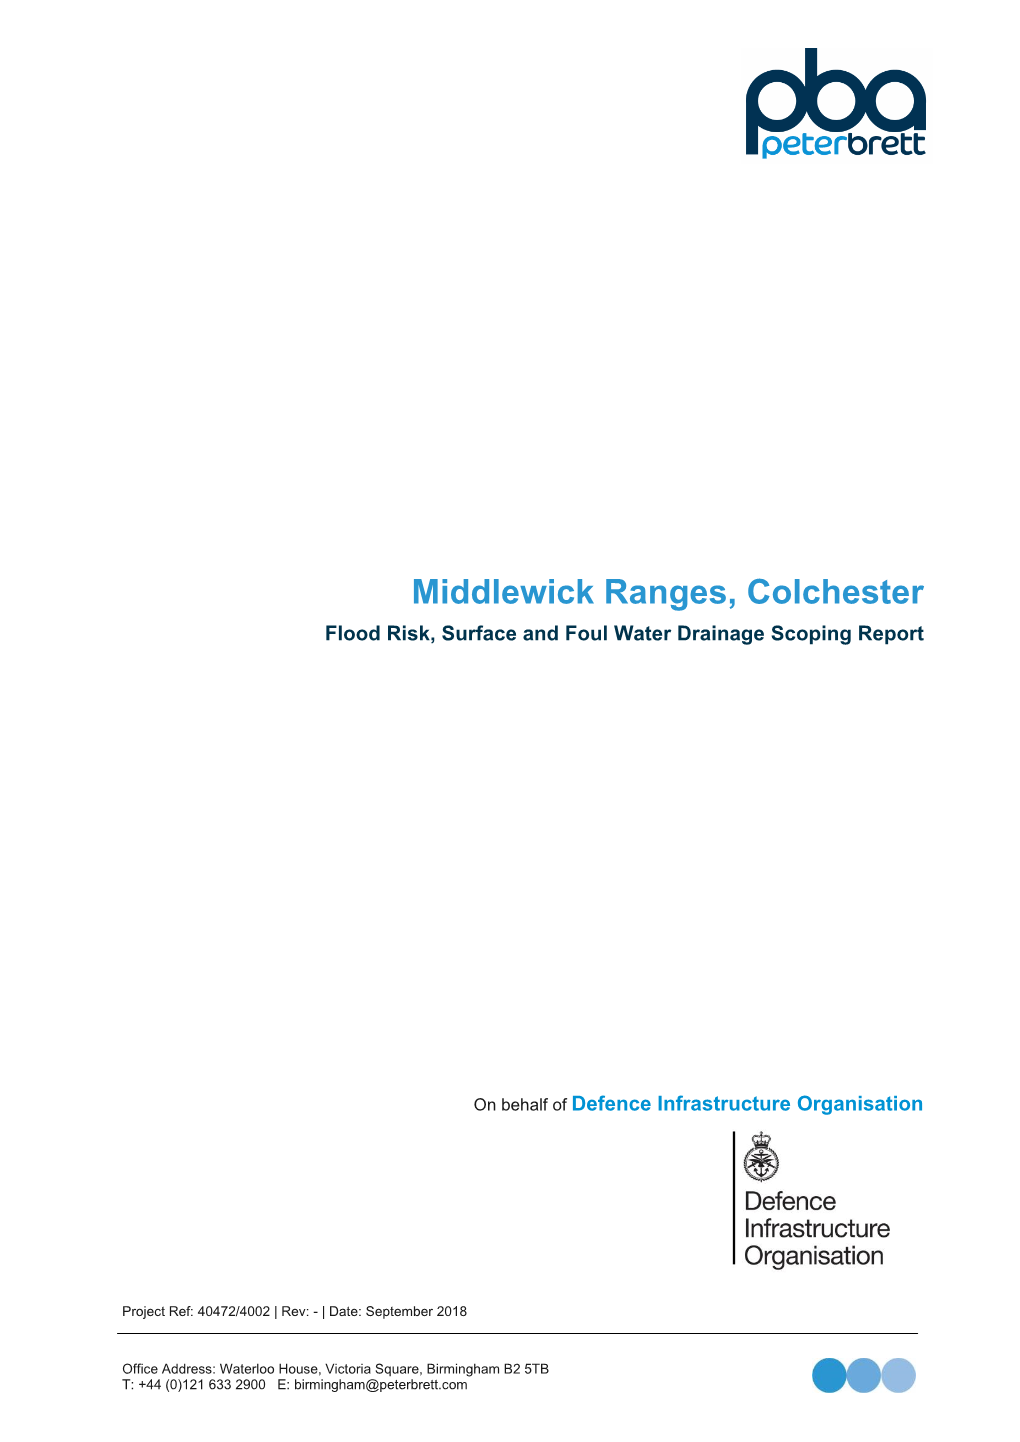 Annexe 4: Middlewick Ranges Flood Risk and Drainage Scoping Report